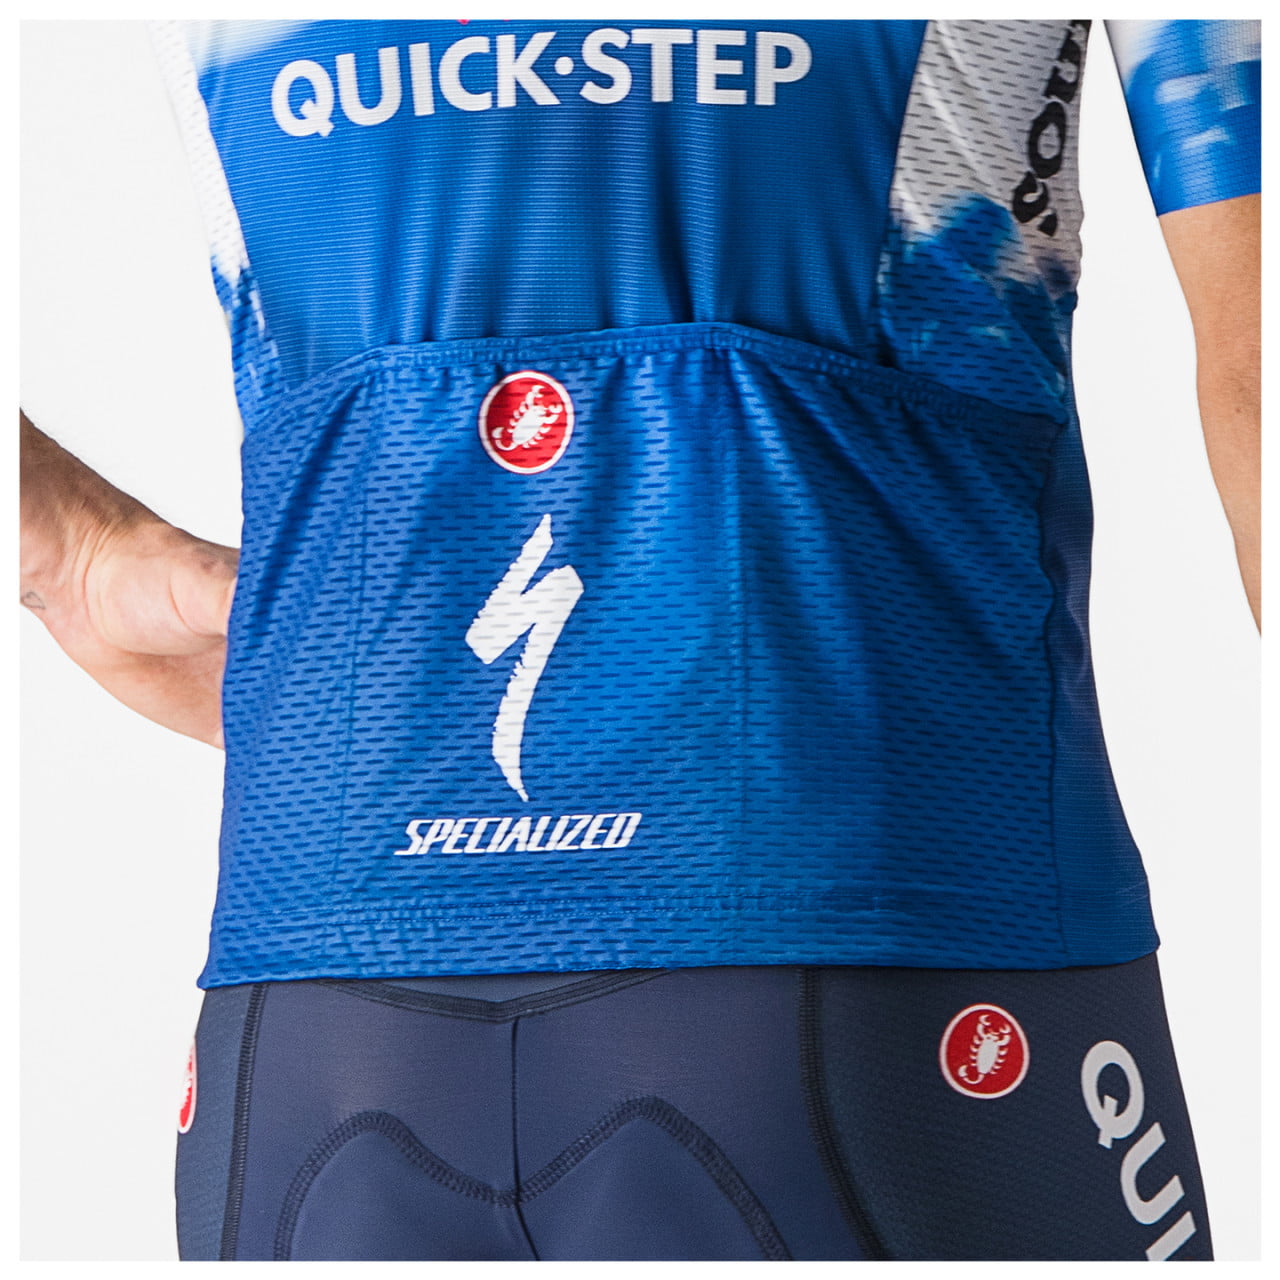 SOUDAL QUICK-STEP Short Sleeve Jersey 2024